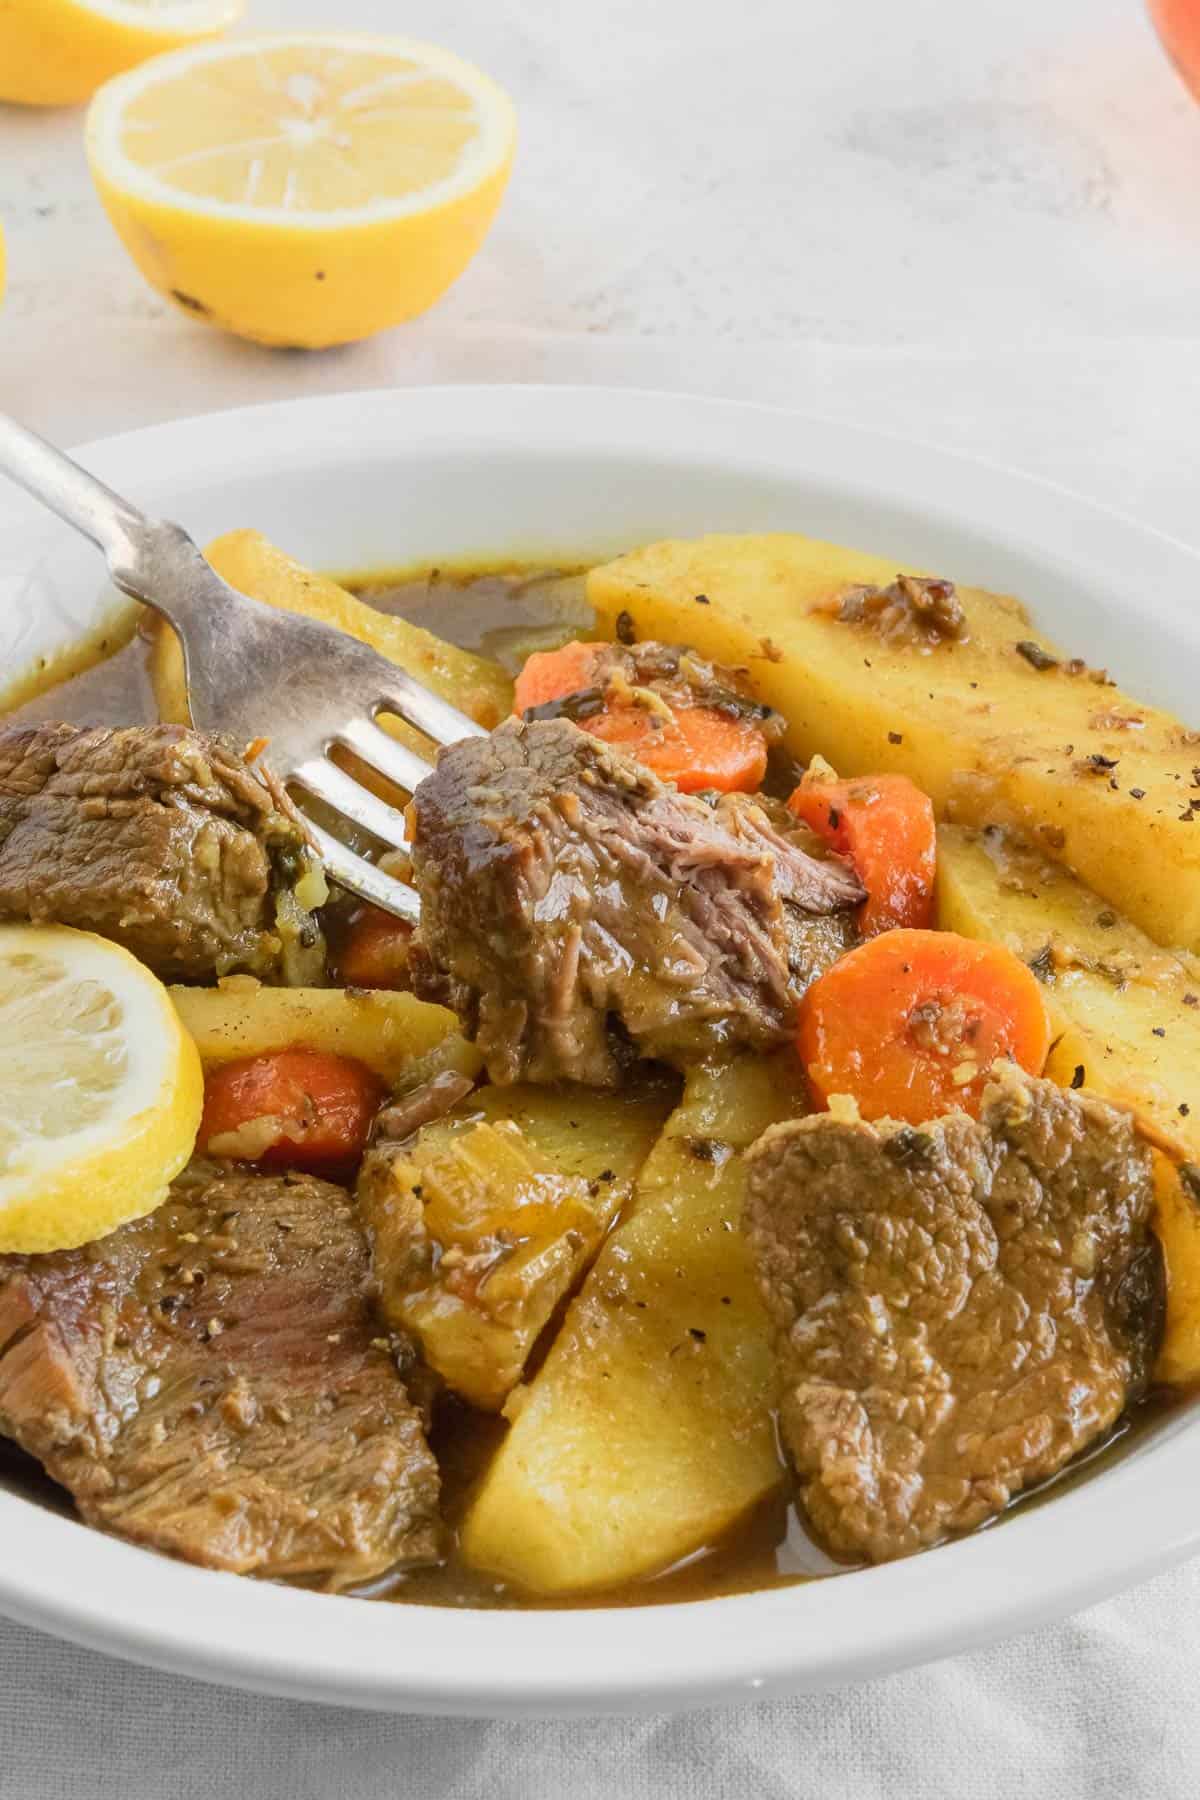 Beef And Potato Stew